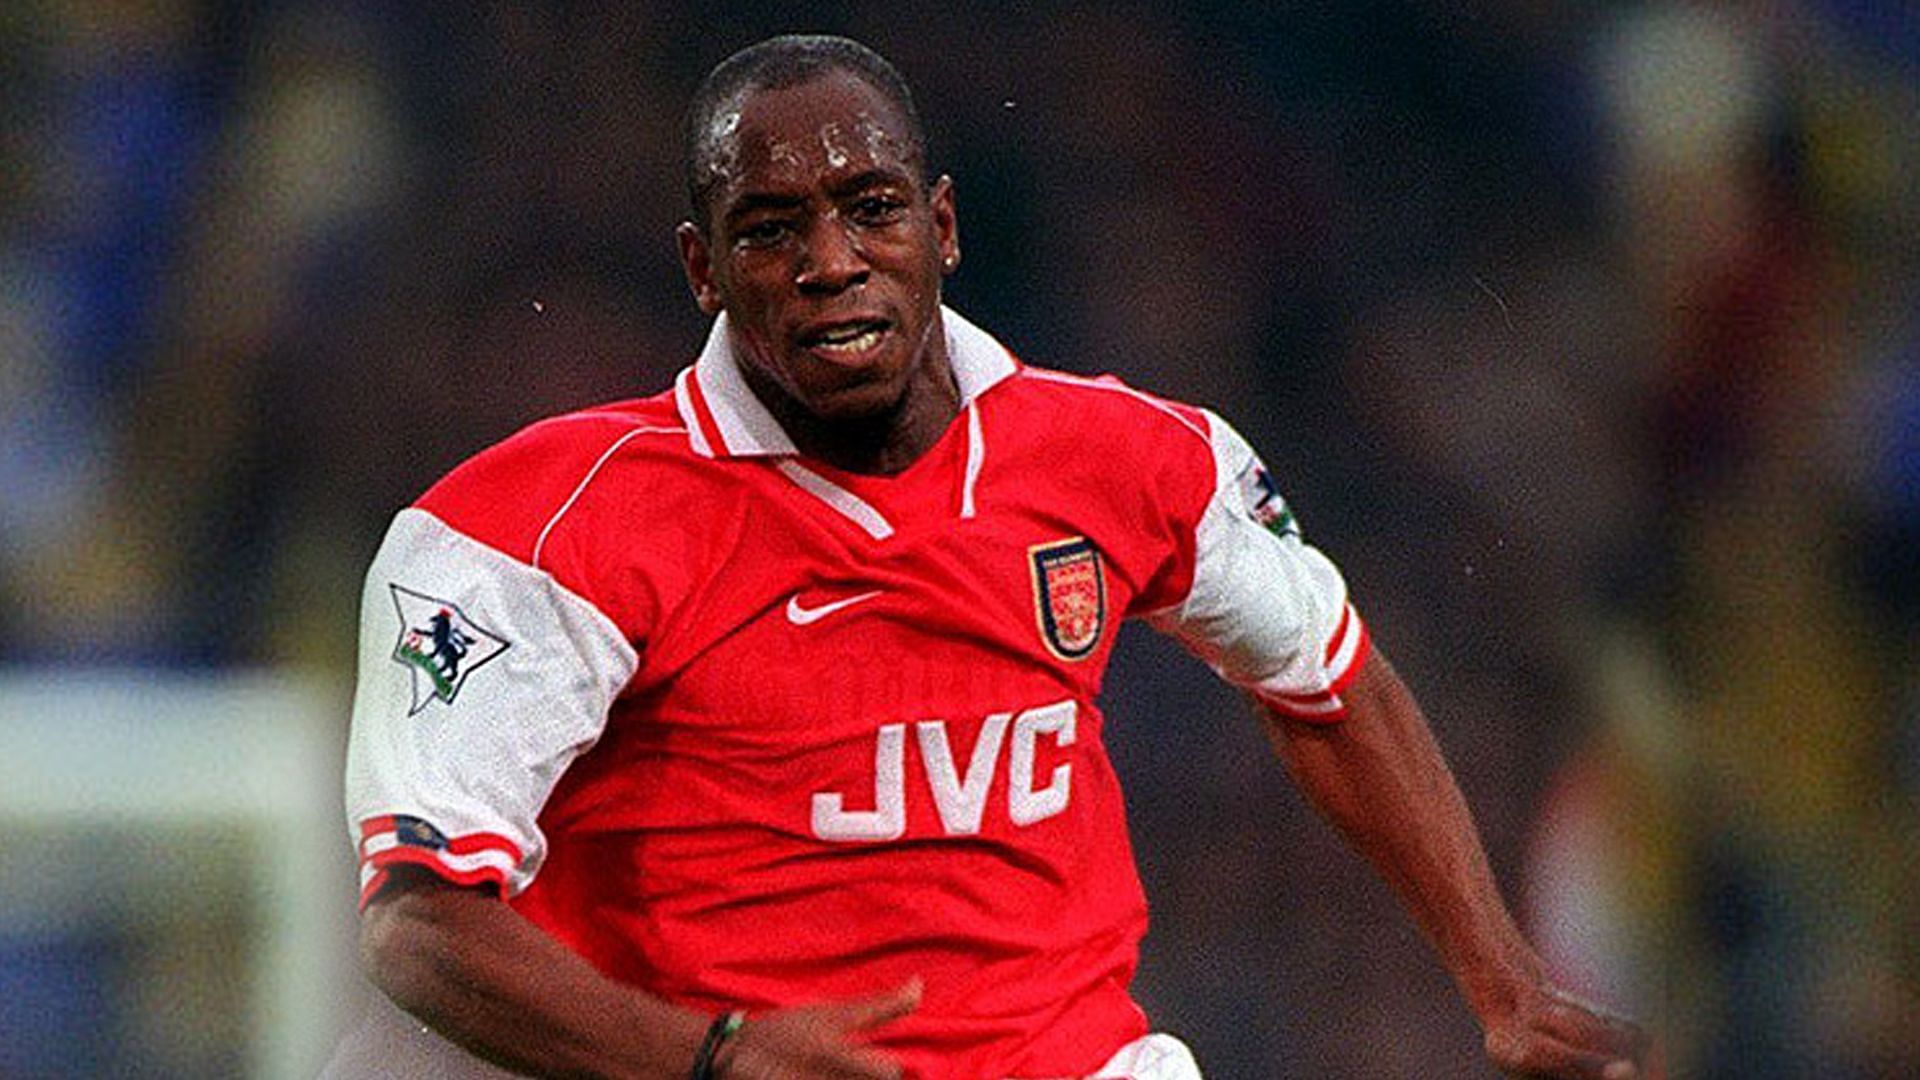 Ian Wright playing for Arsenal